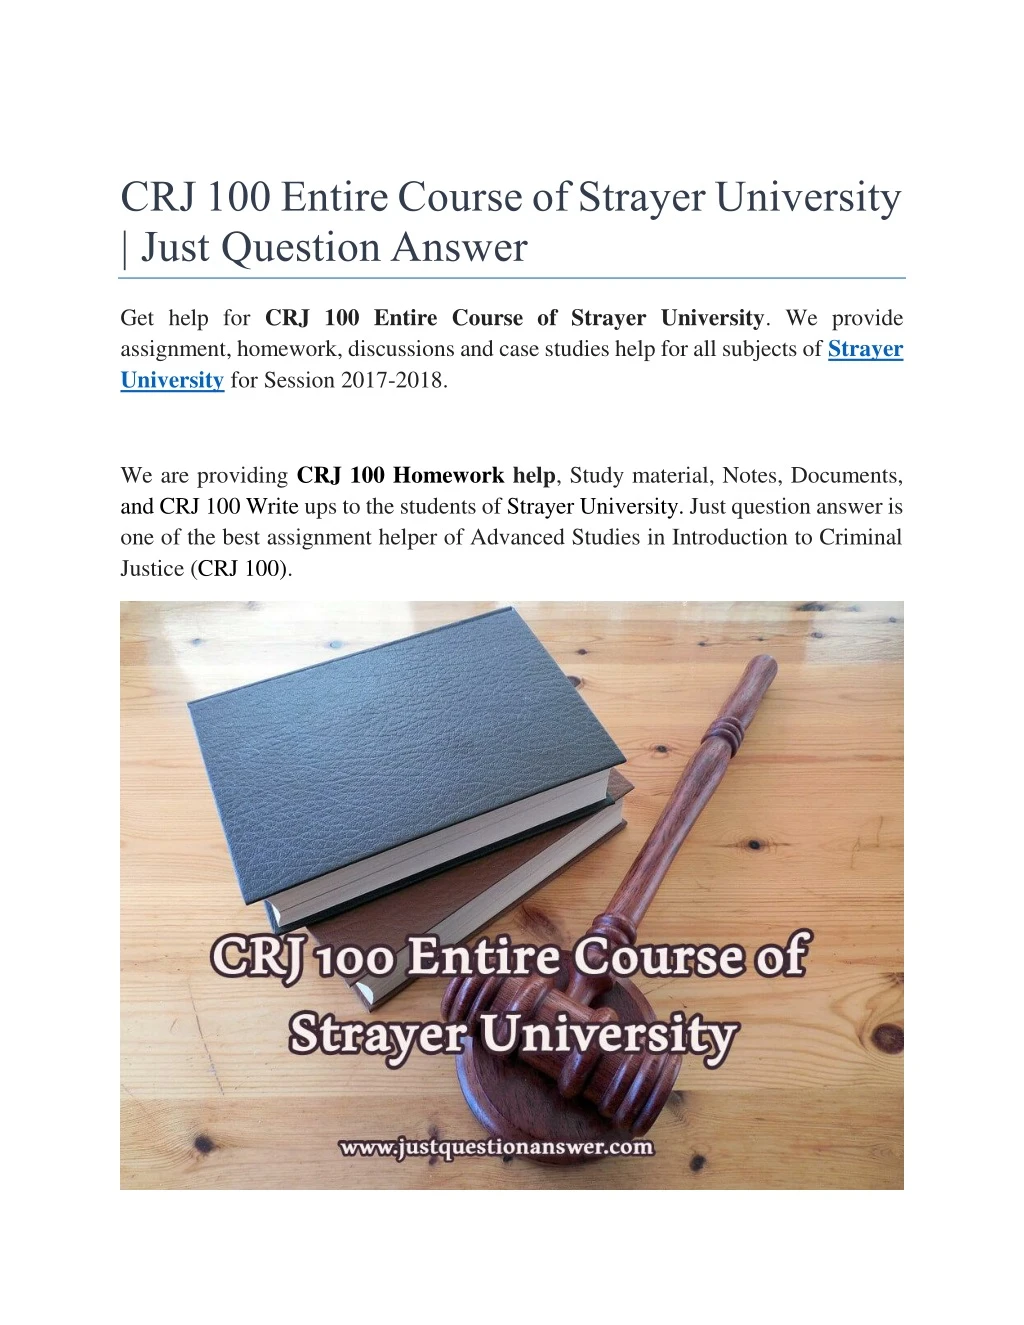 crj 100 entire course of strayer university just